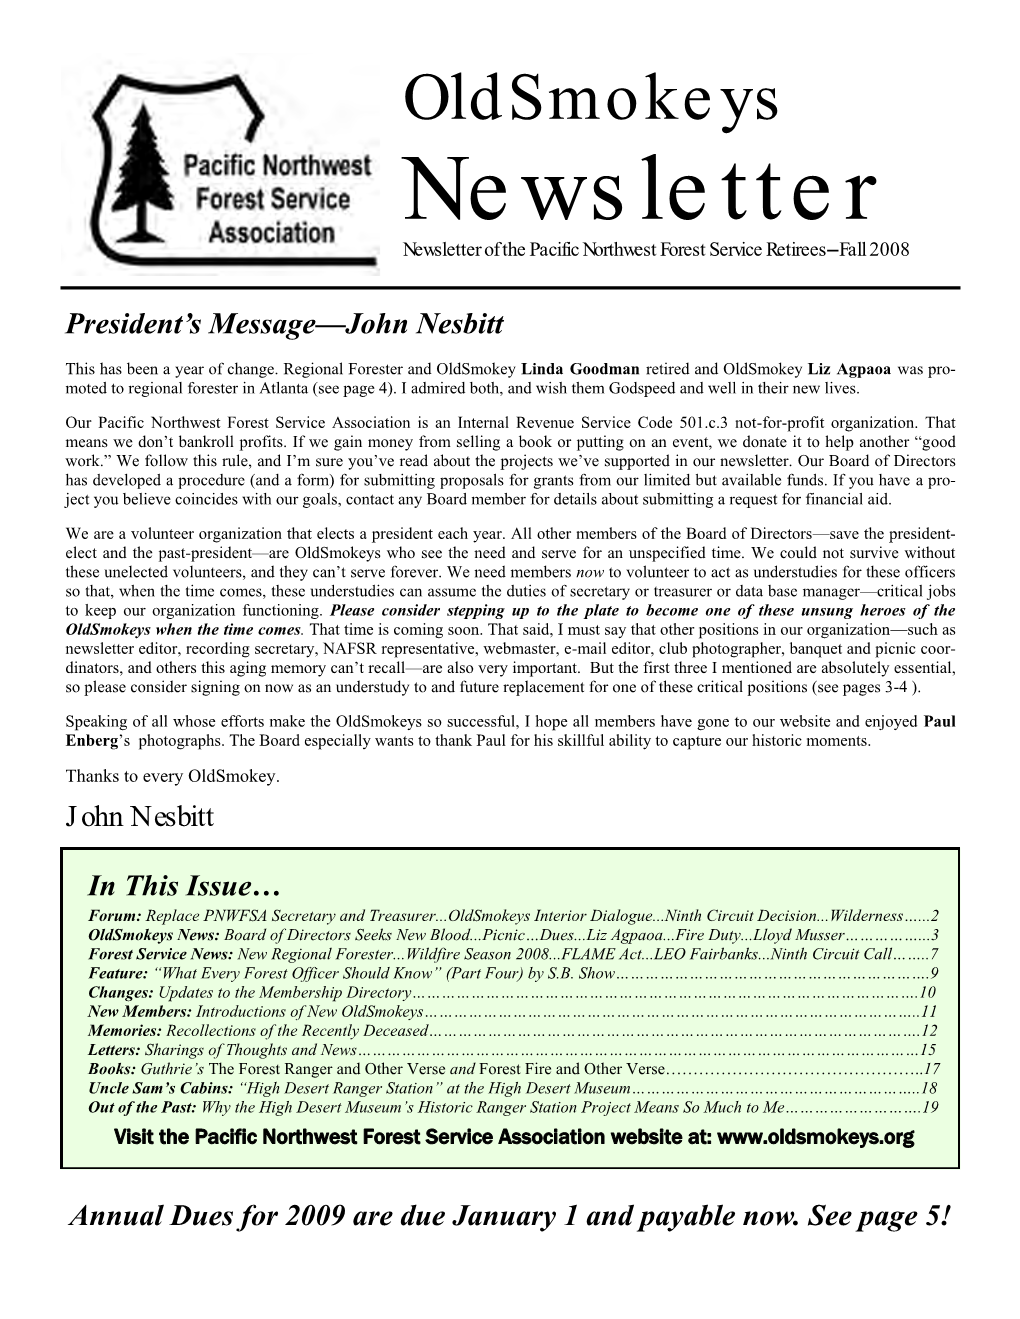 Newsletter Newsletter of the Pacific Northwest Forest Service Retirees—Fall 2008